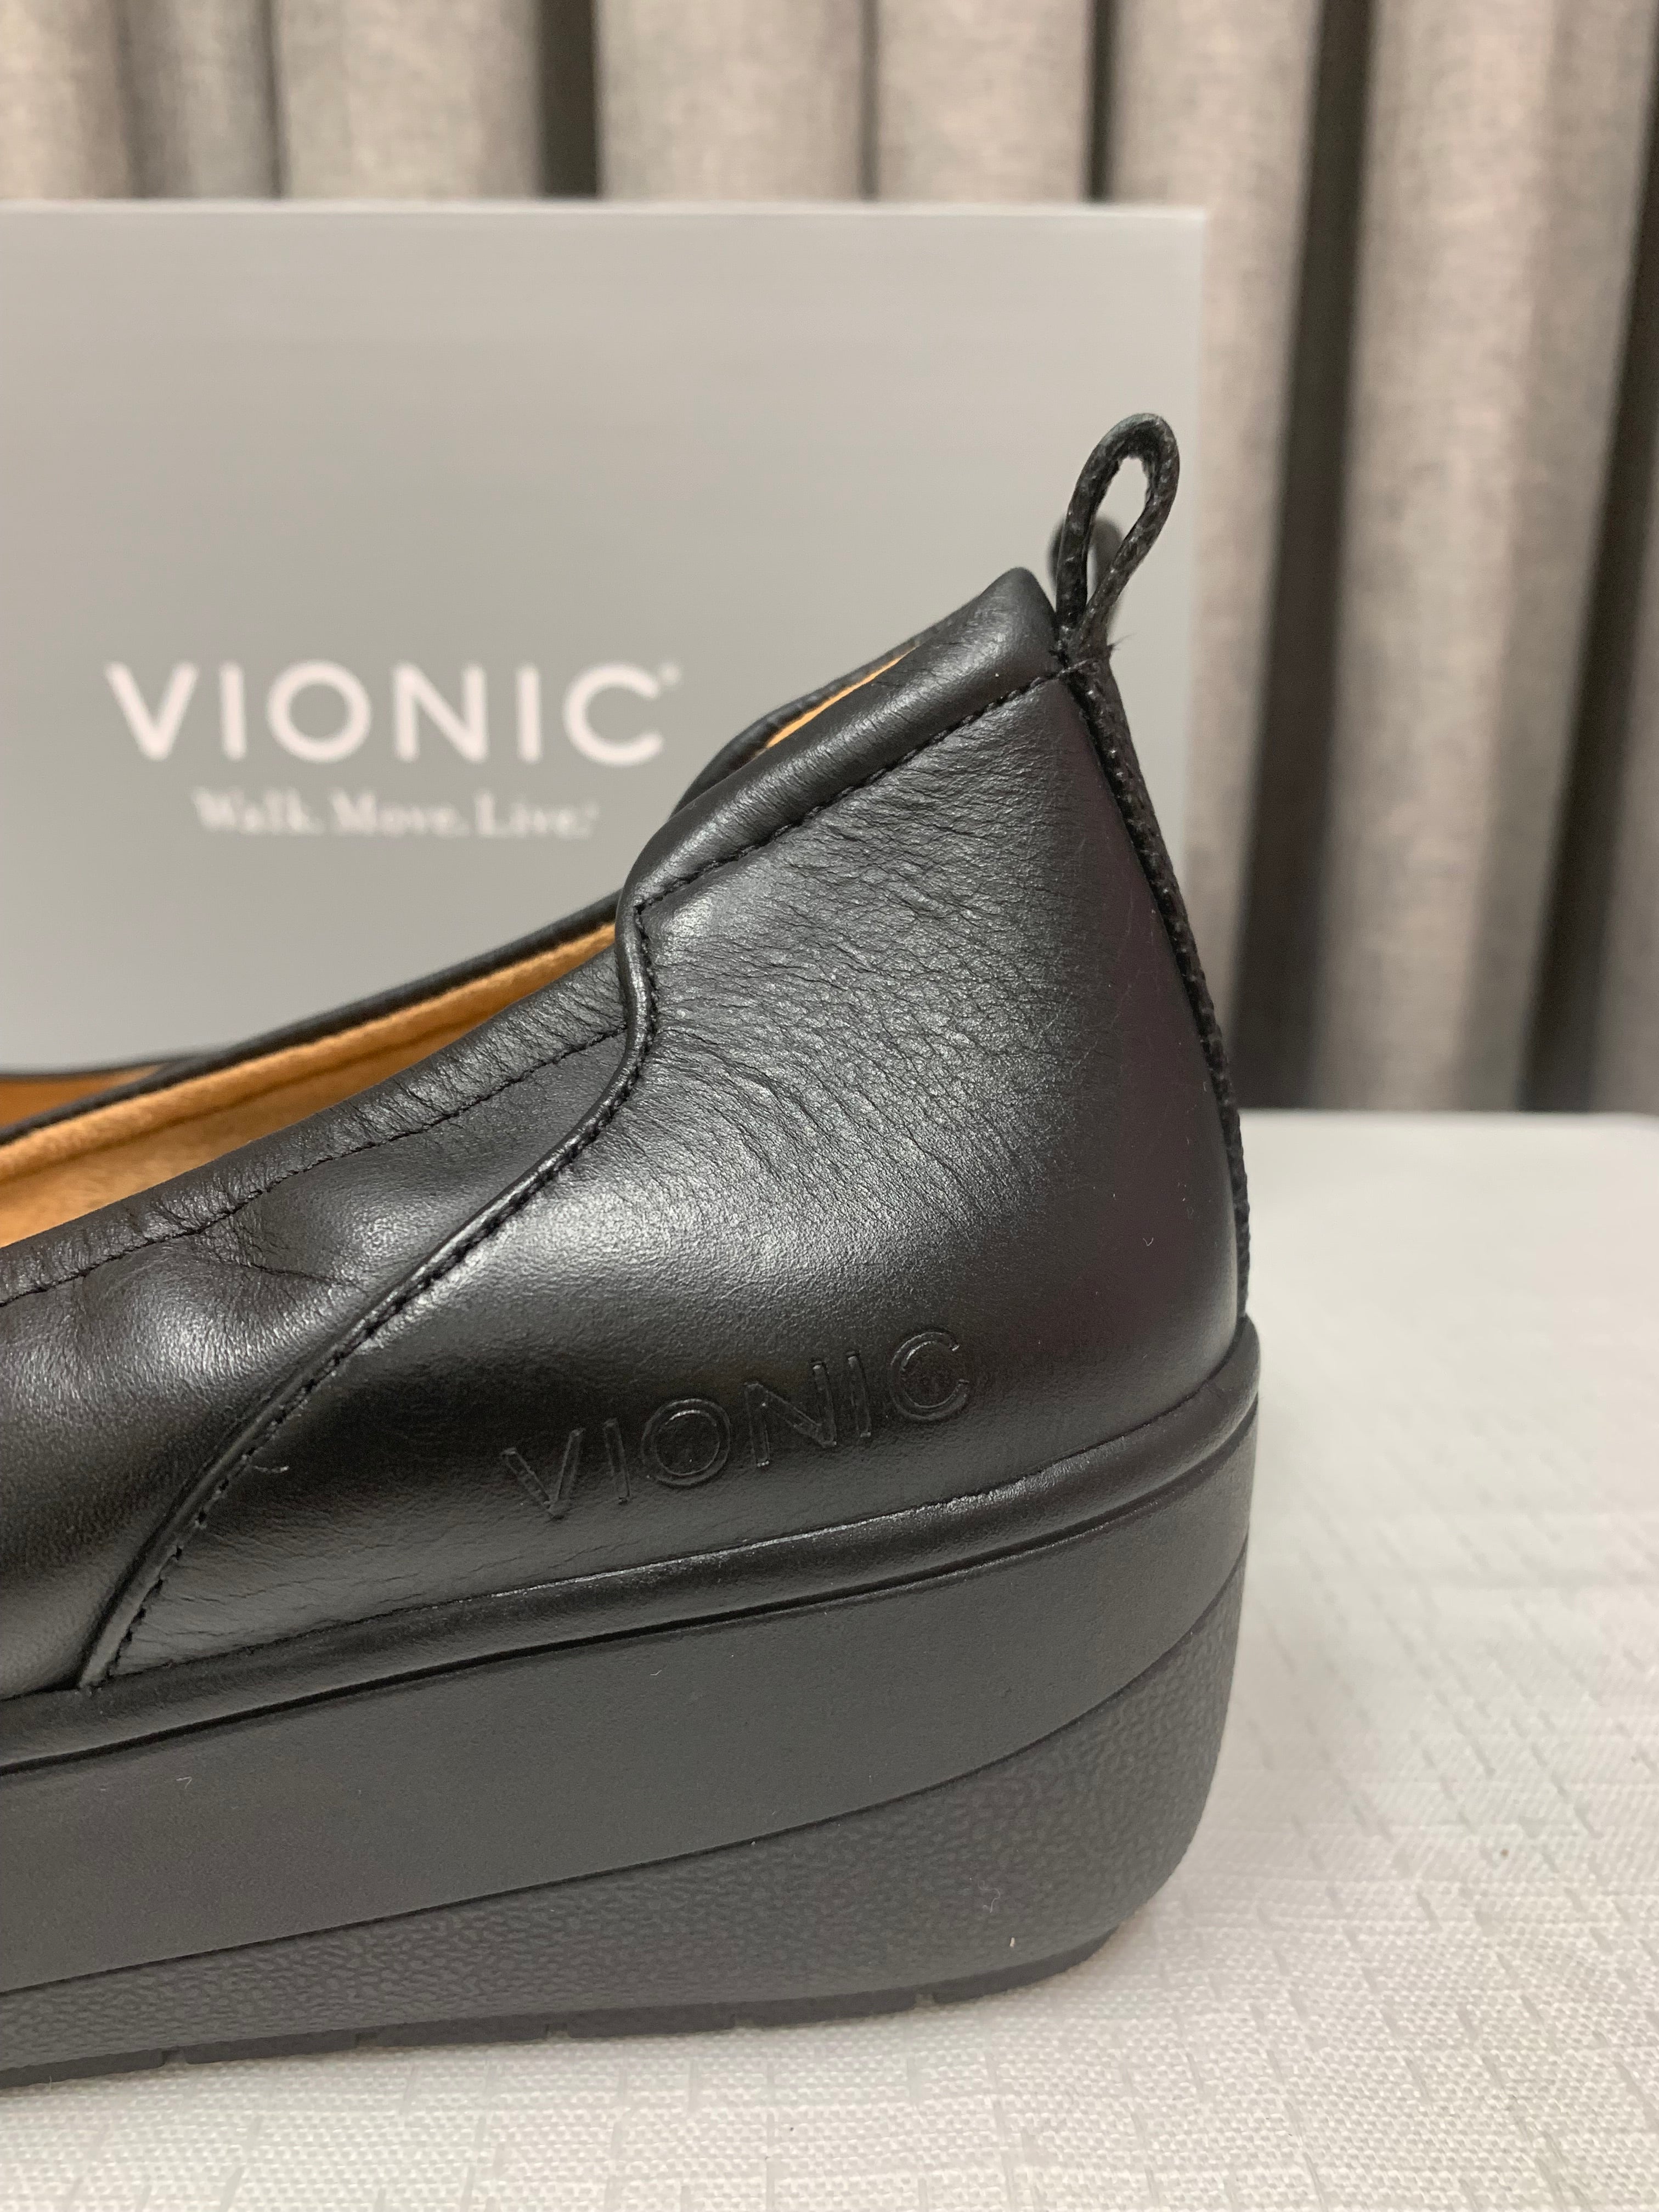 Vionic Jacey Wedge Slip-ON Shoes / Size: US 9